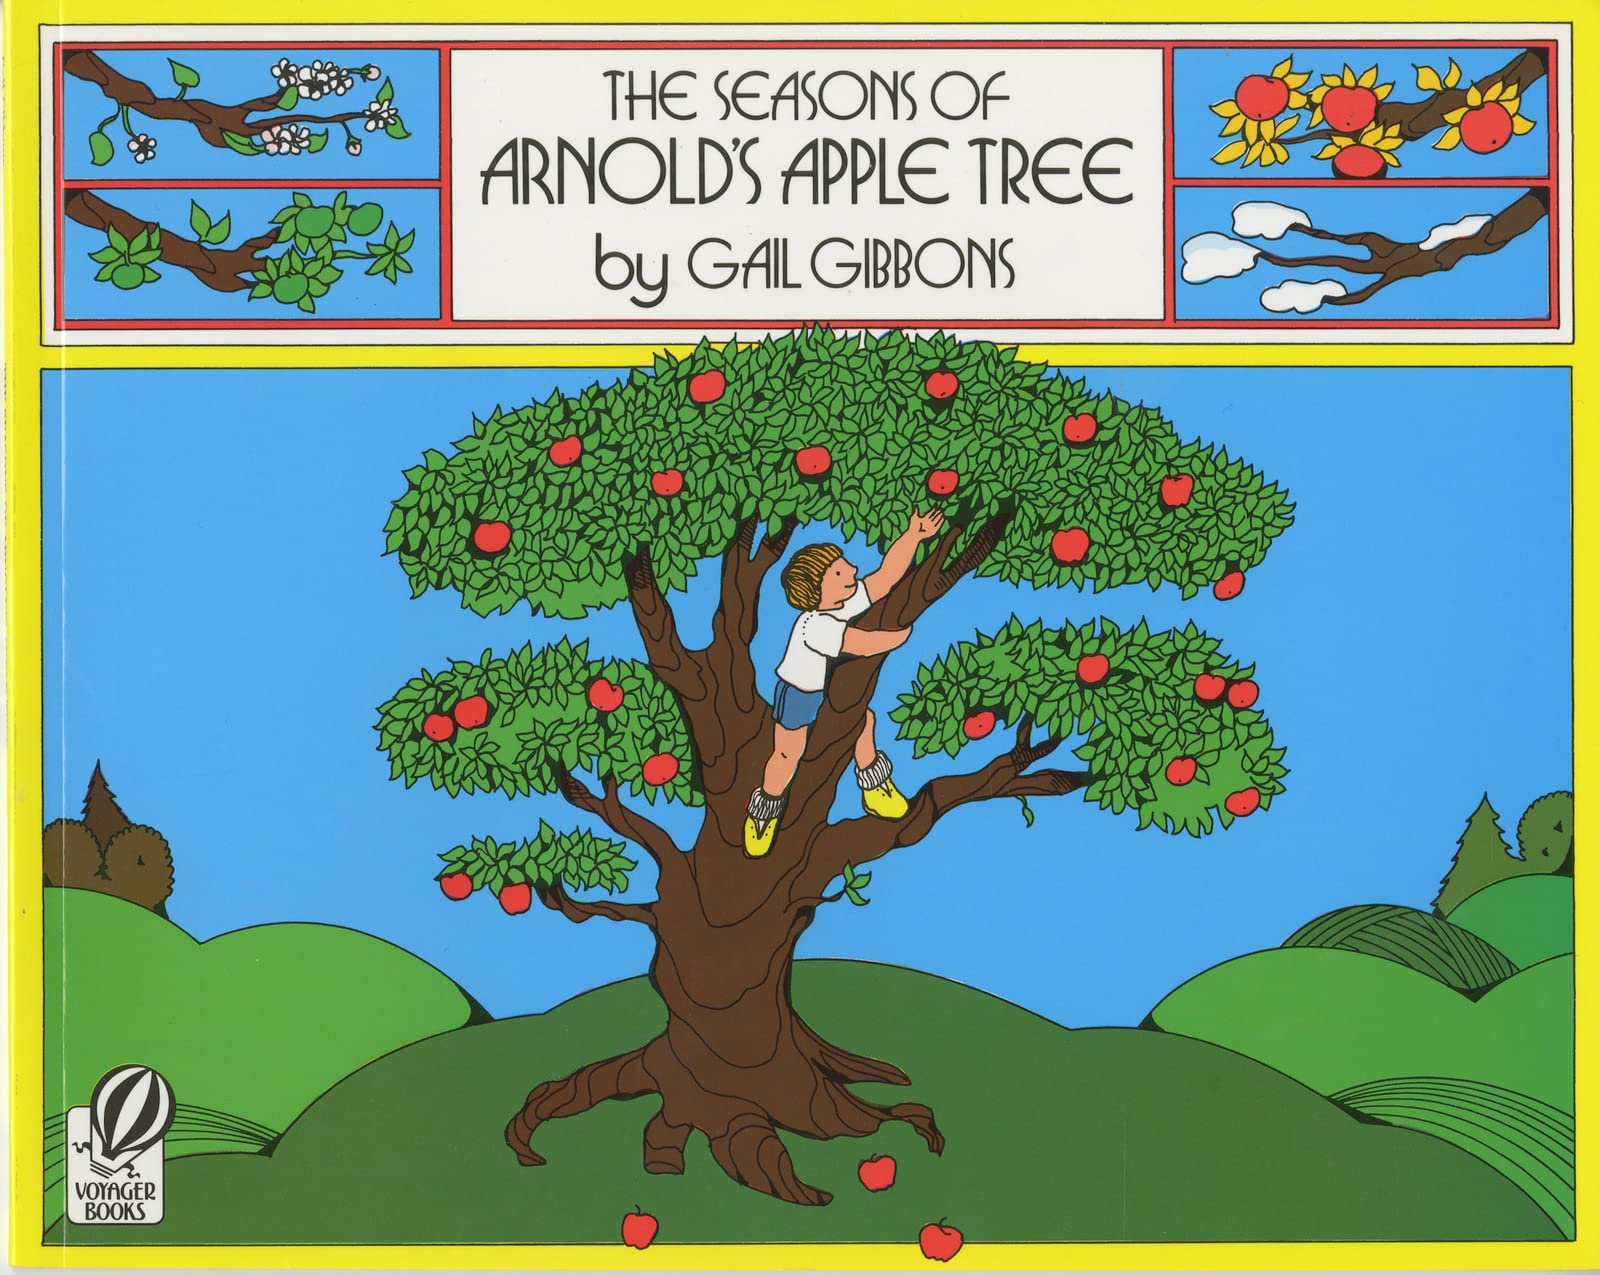 speech and language teaching concepts for The Seasons of Arnold's Apple Tree in speech therapy​ ​